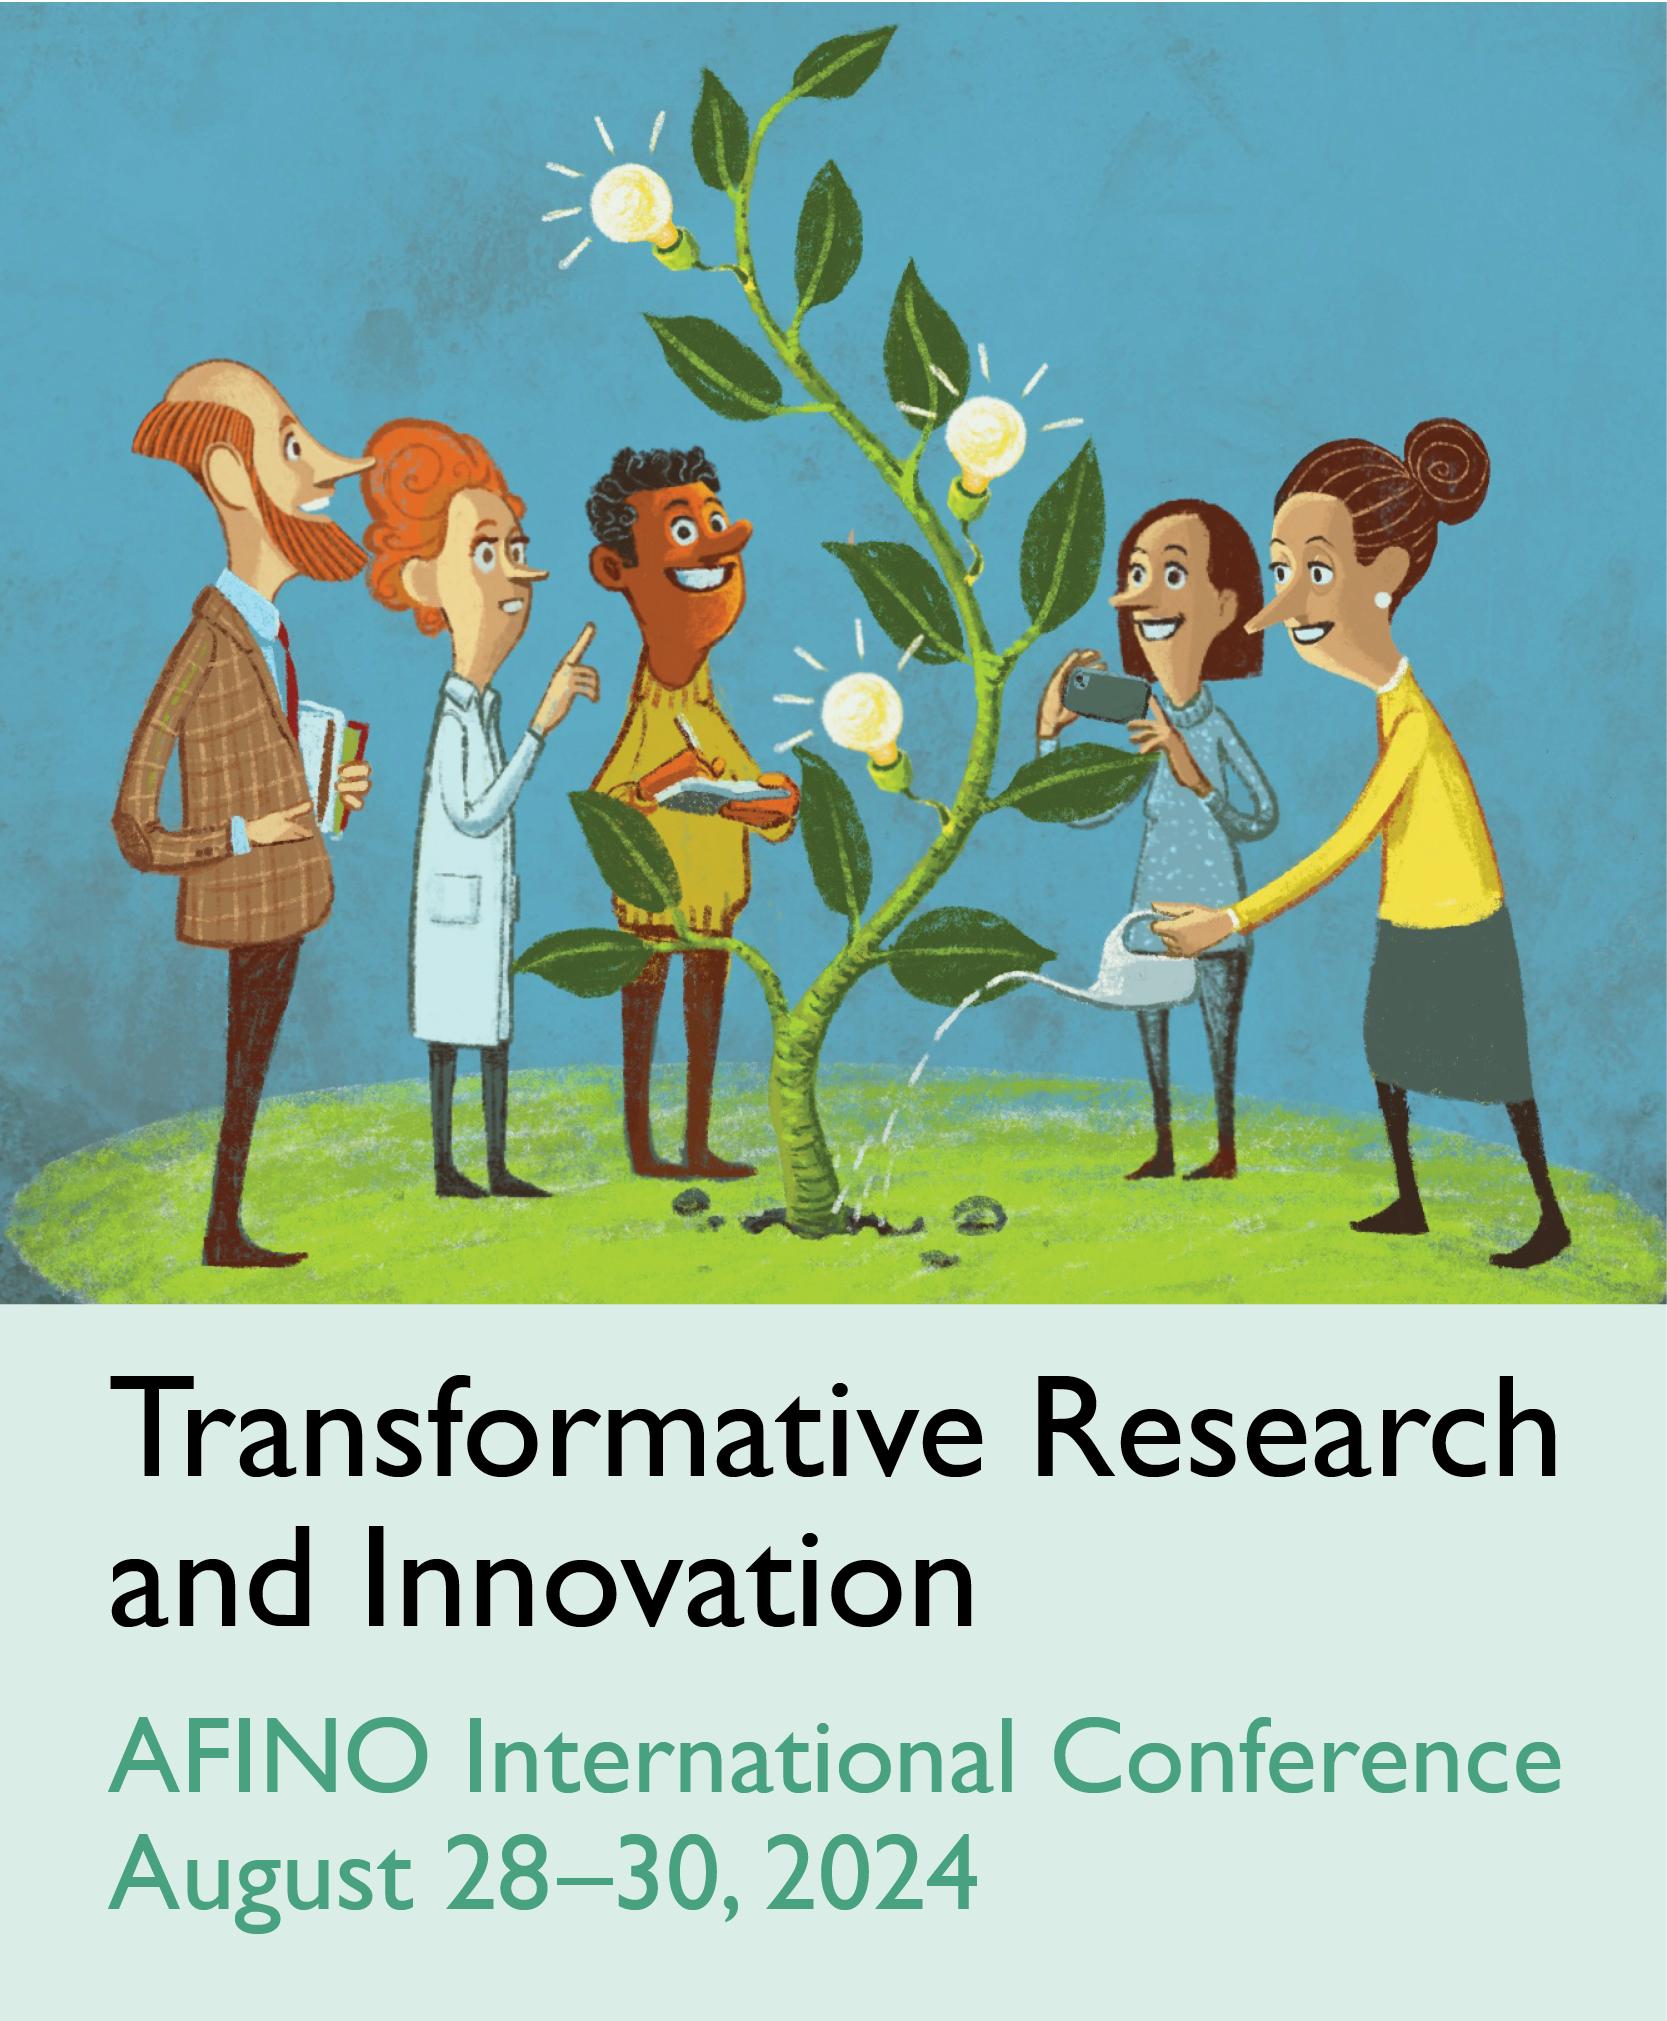 Banner with illustration and text: "Transformative Research and Innovation, AFINO International Conference, August 28-30, 2024"